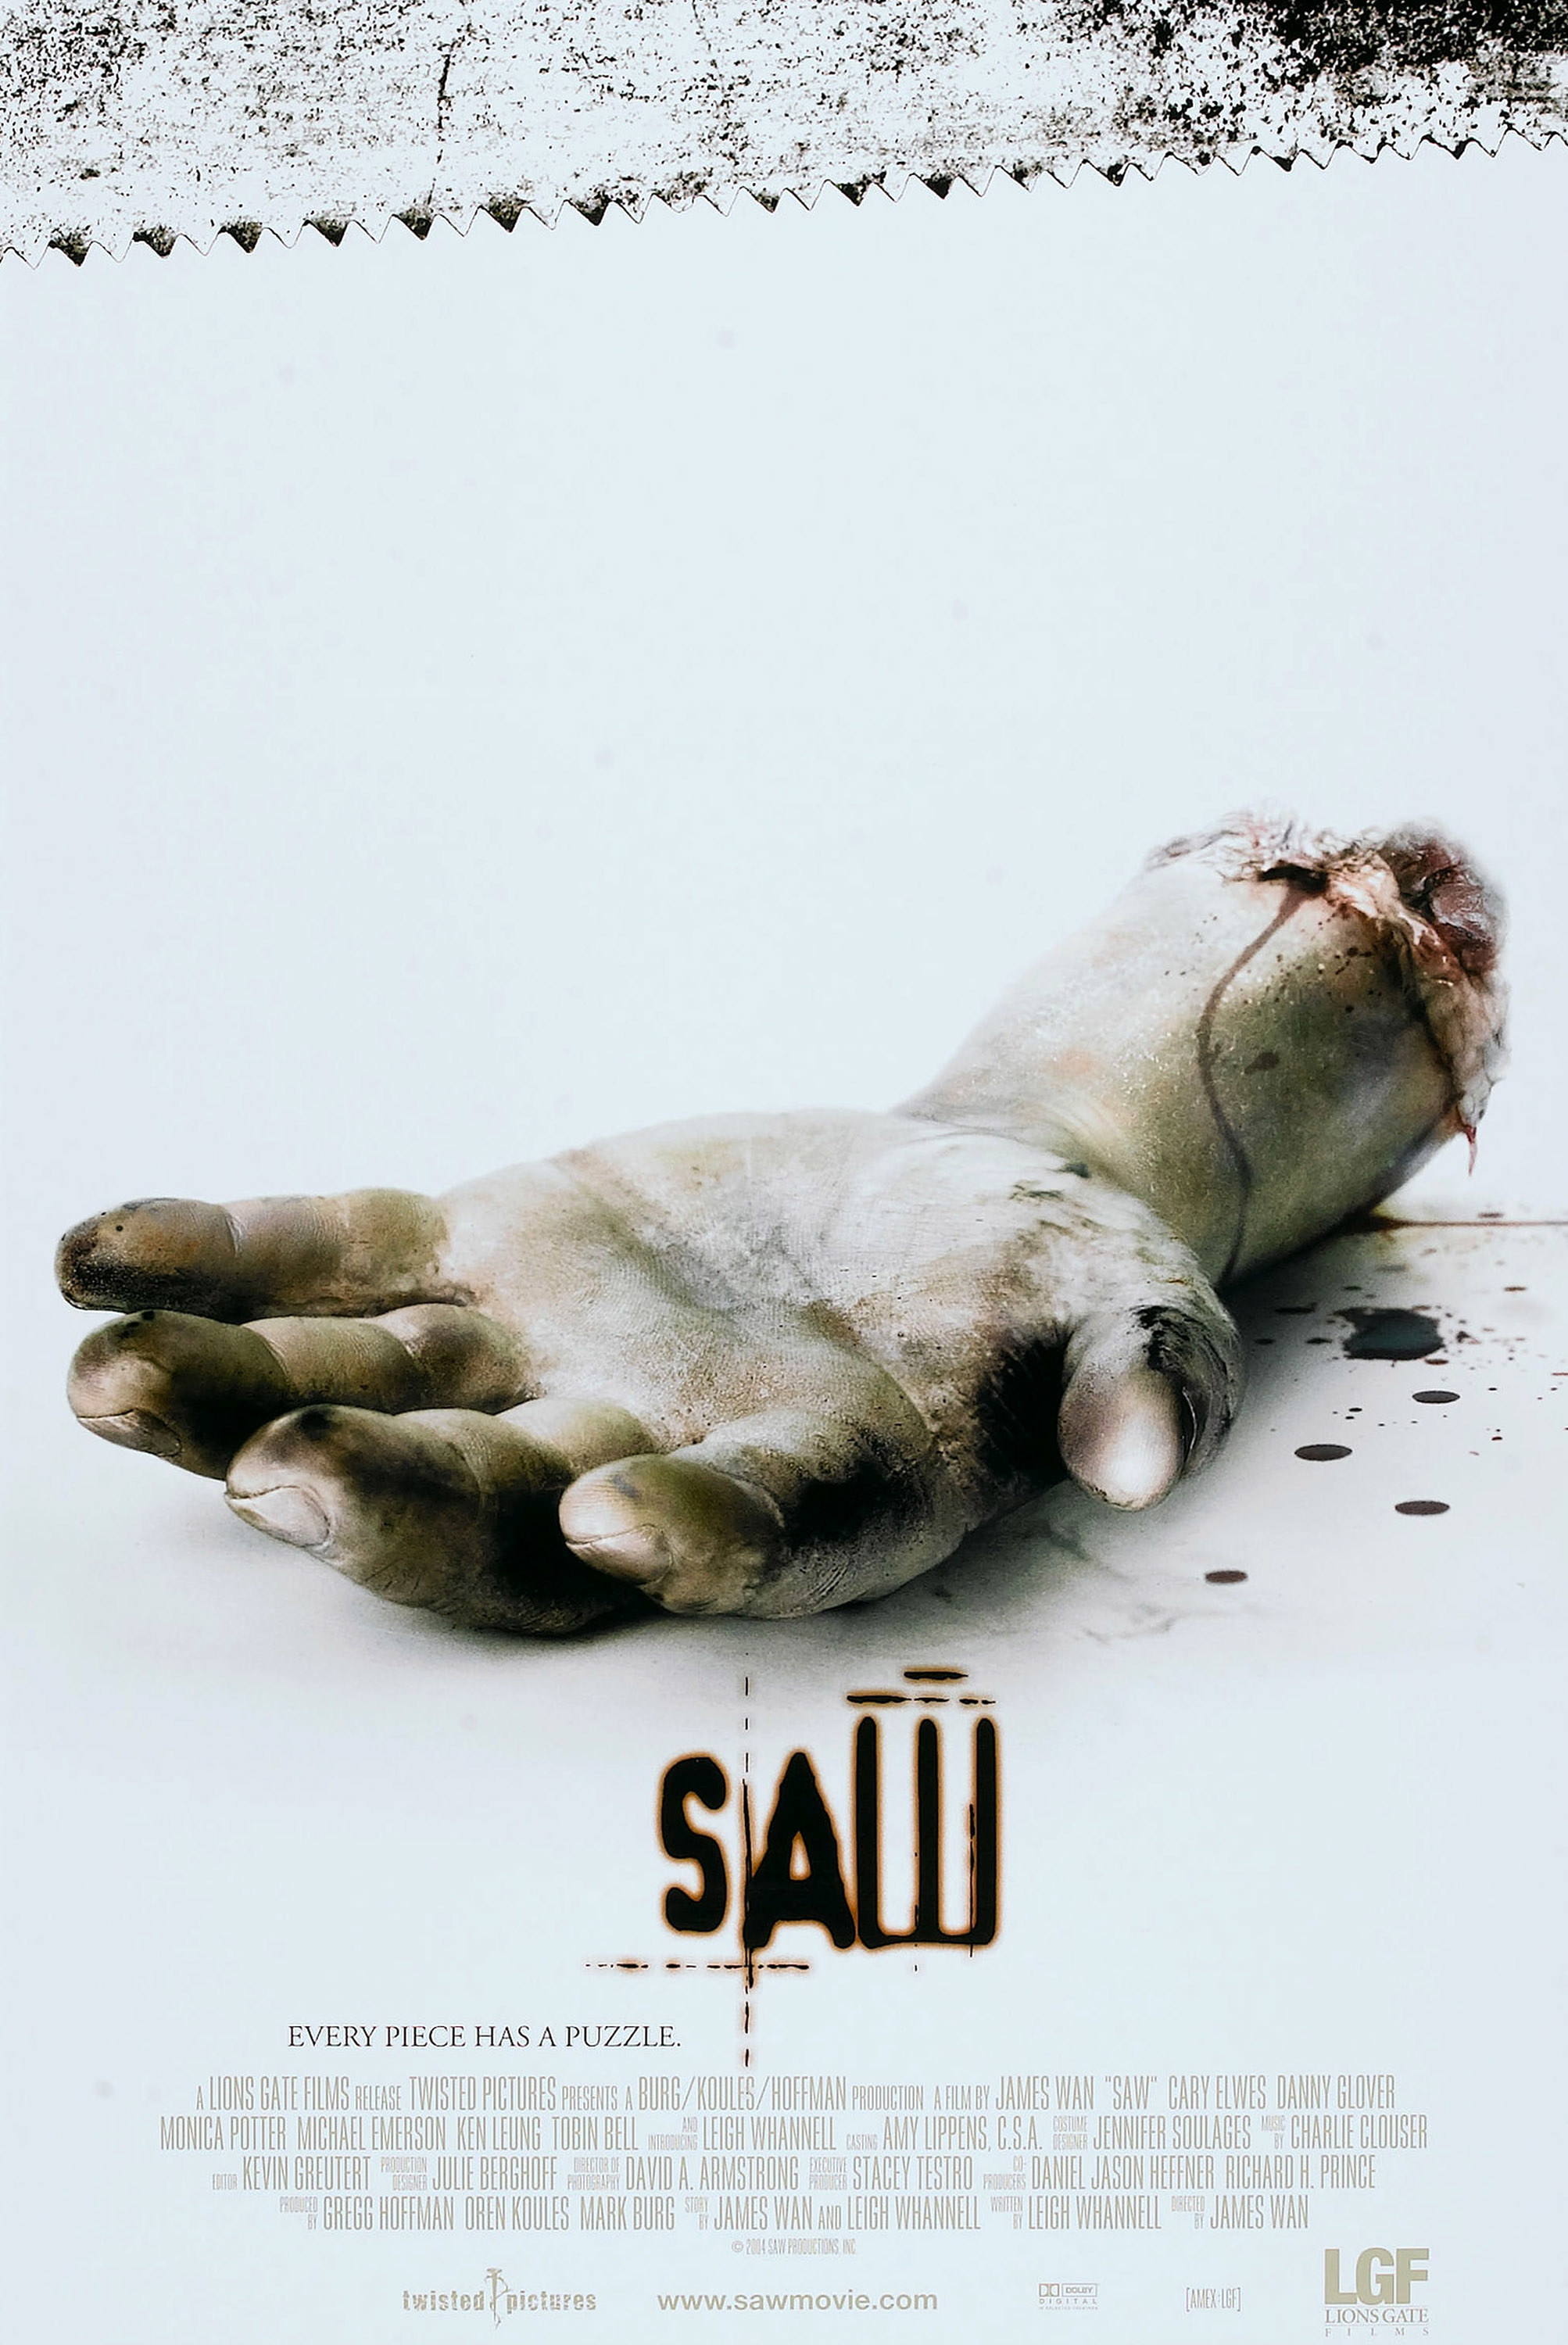 The &quot;Saw&quot; official poster featuring a rotting, cut-off hand laying on the ground